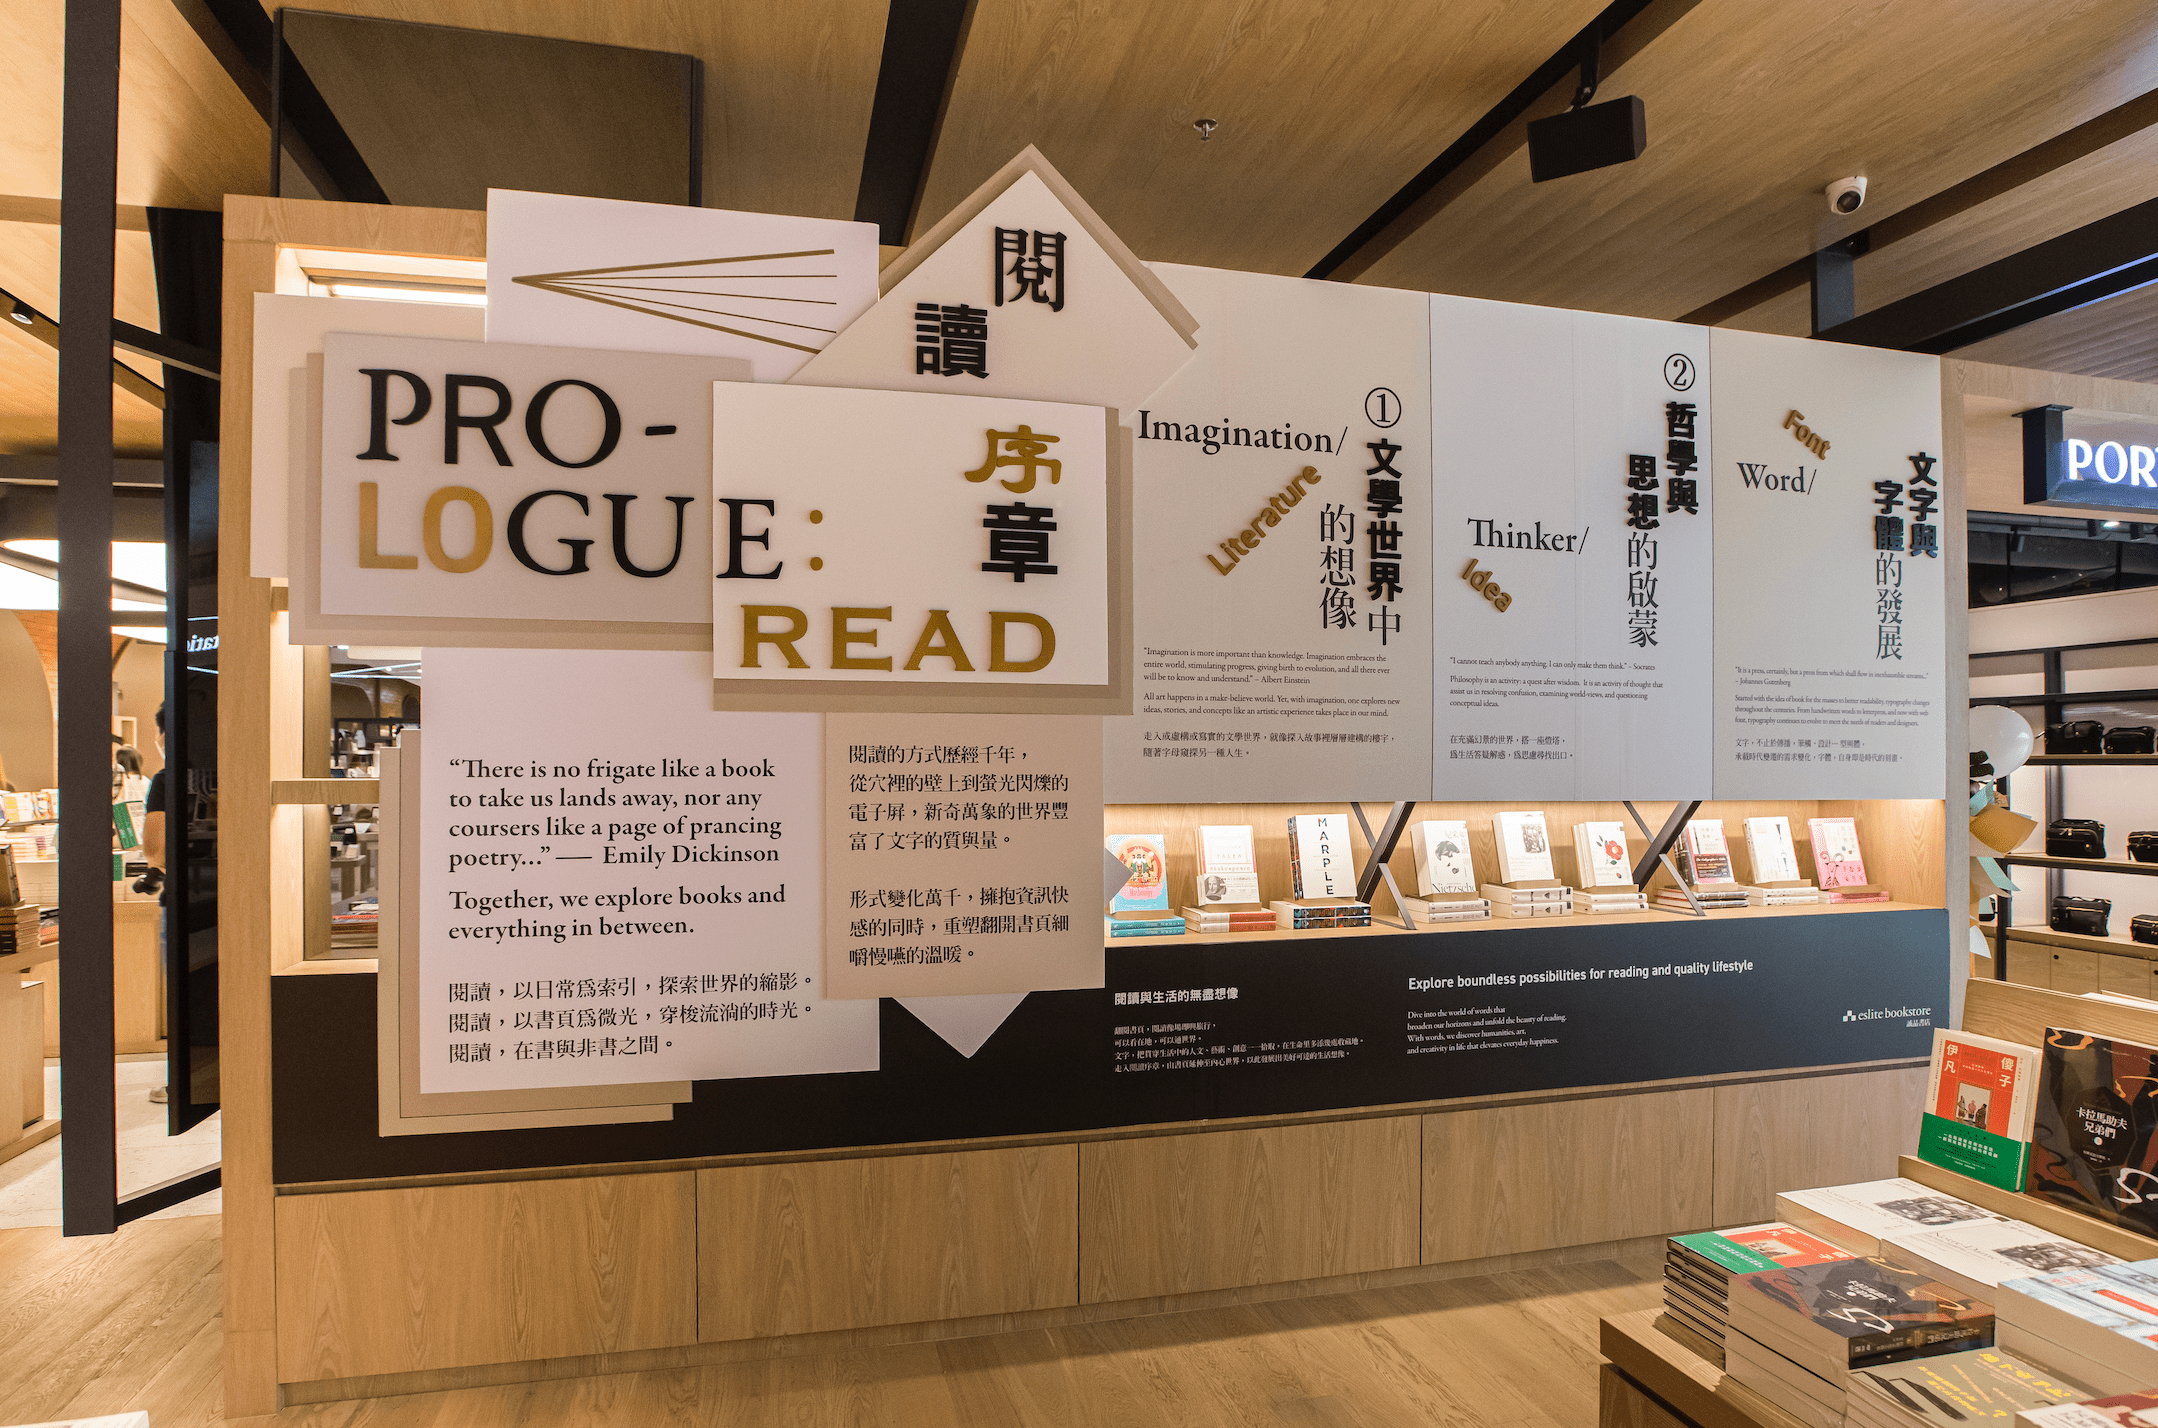 In conjunction with the grand opening, book fairs titled prologue read and the five senses of the heart have been announced; these follow the theme of rasa, which is the bahasa malaysia word for ‘feeling’.